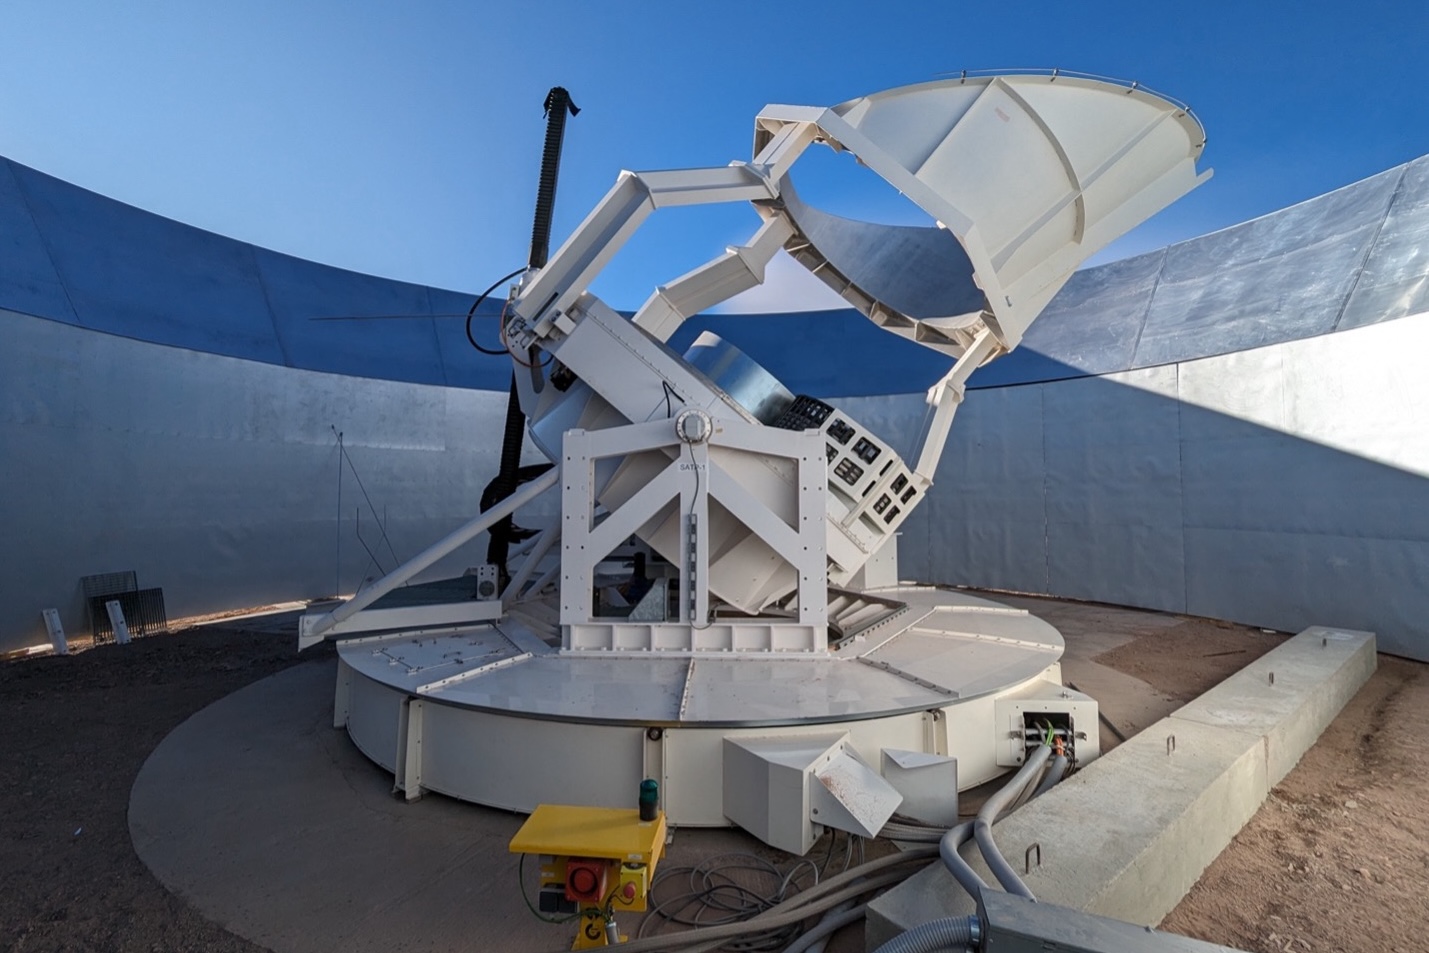 Under a blue sky on a rooftop a scientific instrument with cylinders like a telescope is plugged in and ready for operations